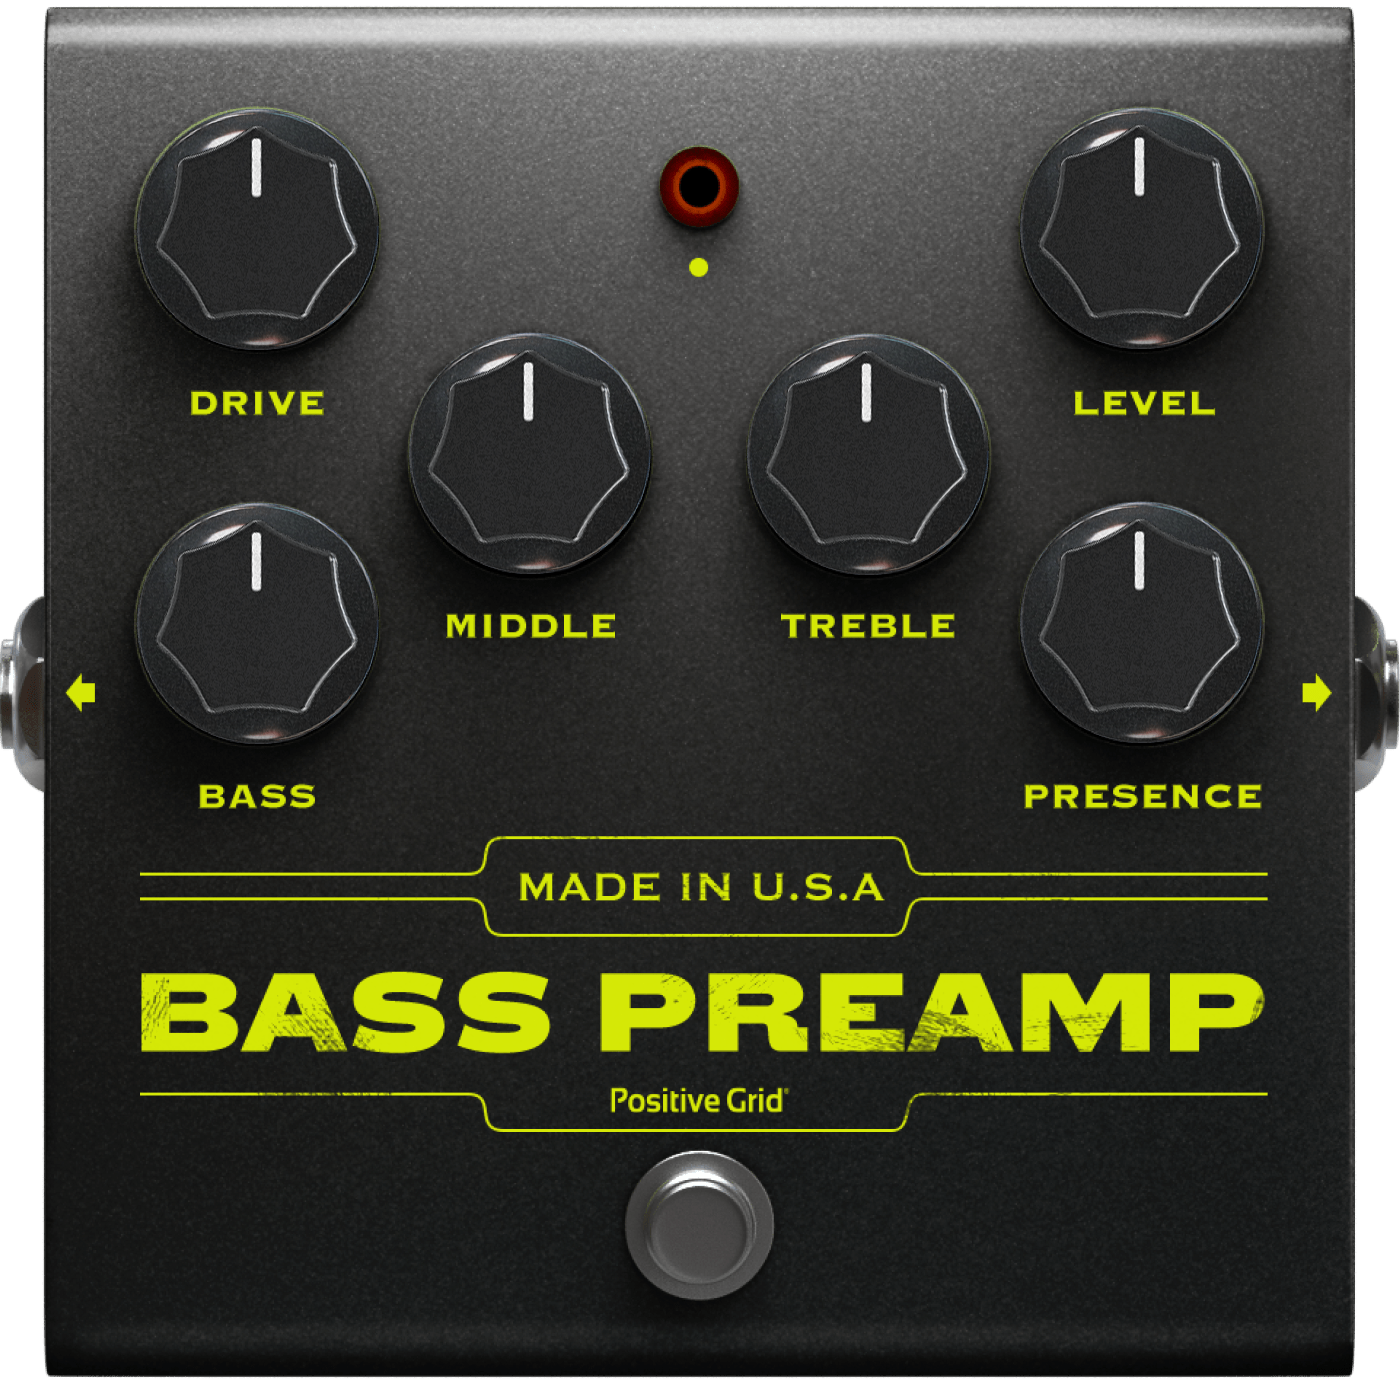 Bass Preamp, inspired by NC